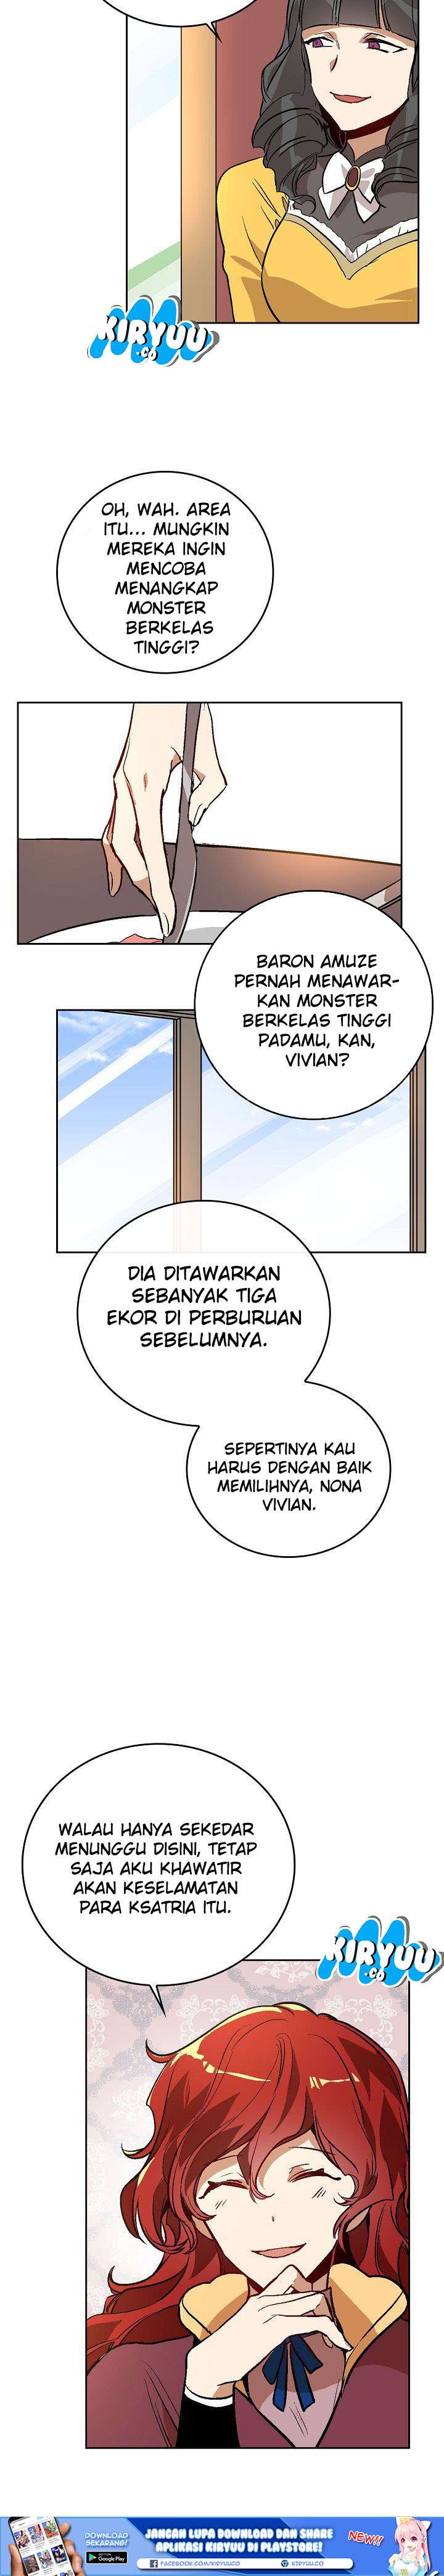 The Reason Why Raeliana Ended Up at the Duke’s Mansion Chapter 31 Bahasa Indonesia